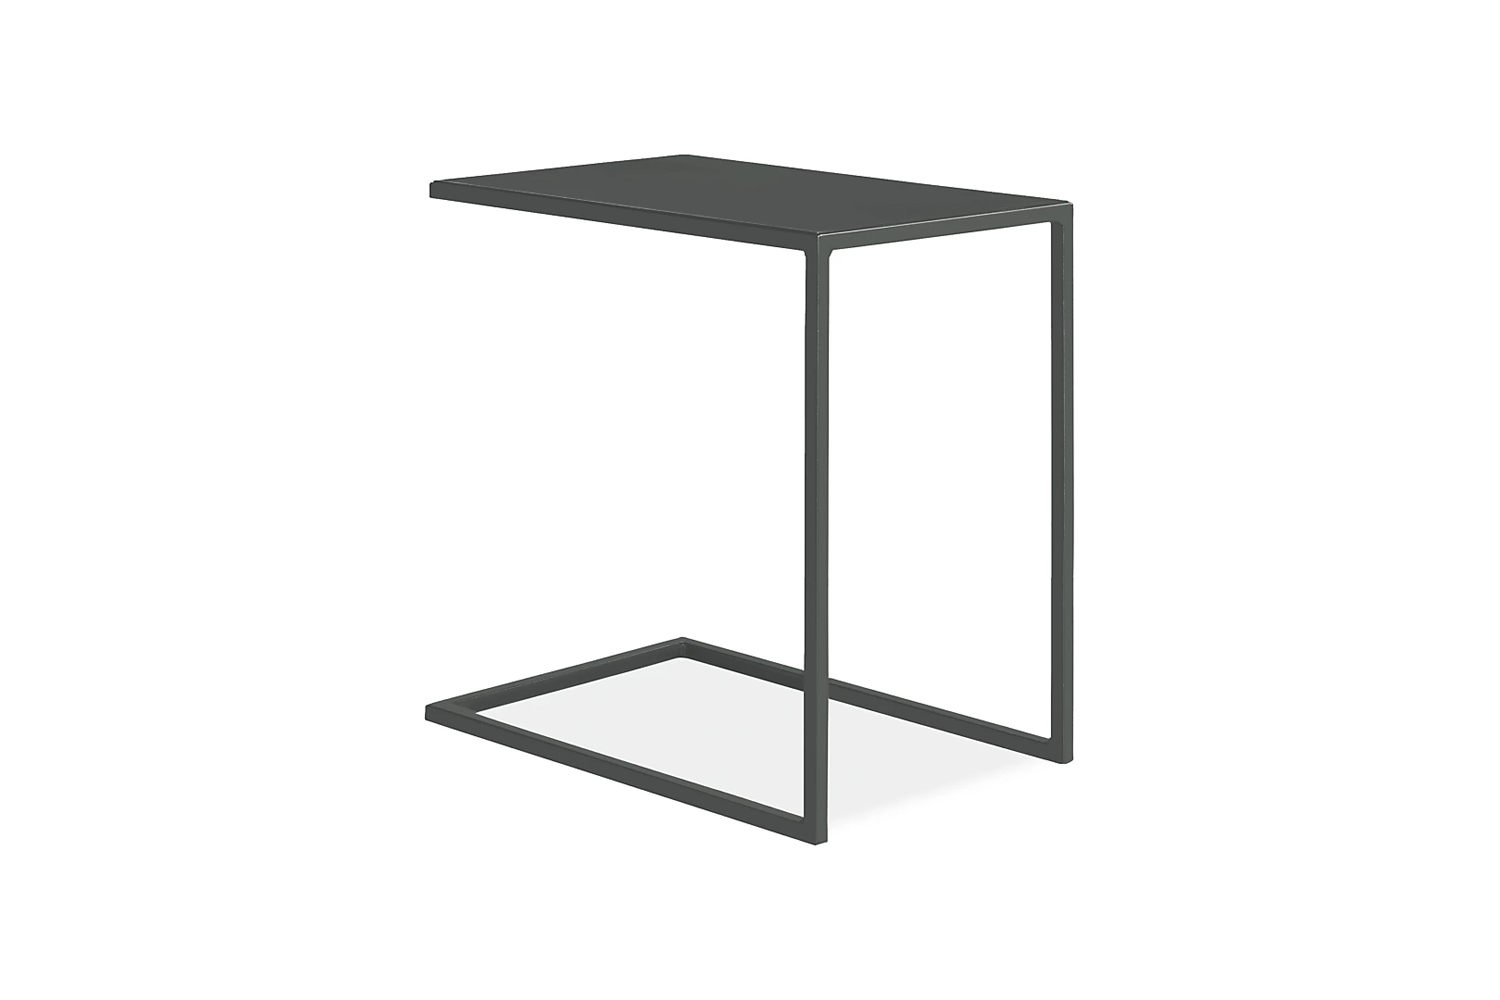 the room & board slim c table comes in a range of colors including graphite 16